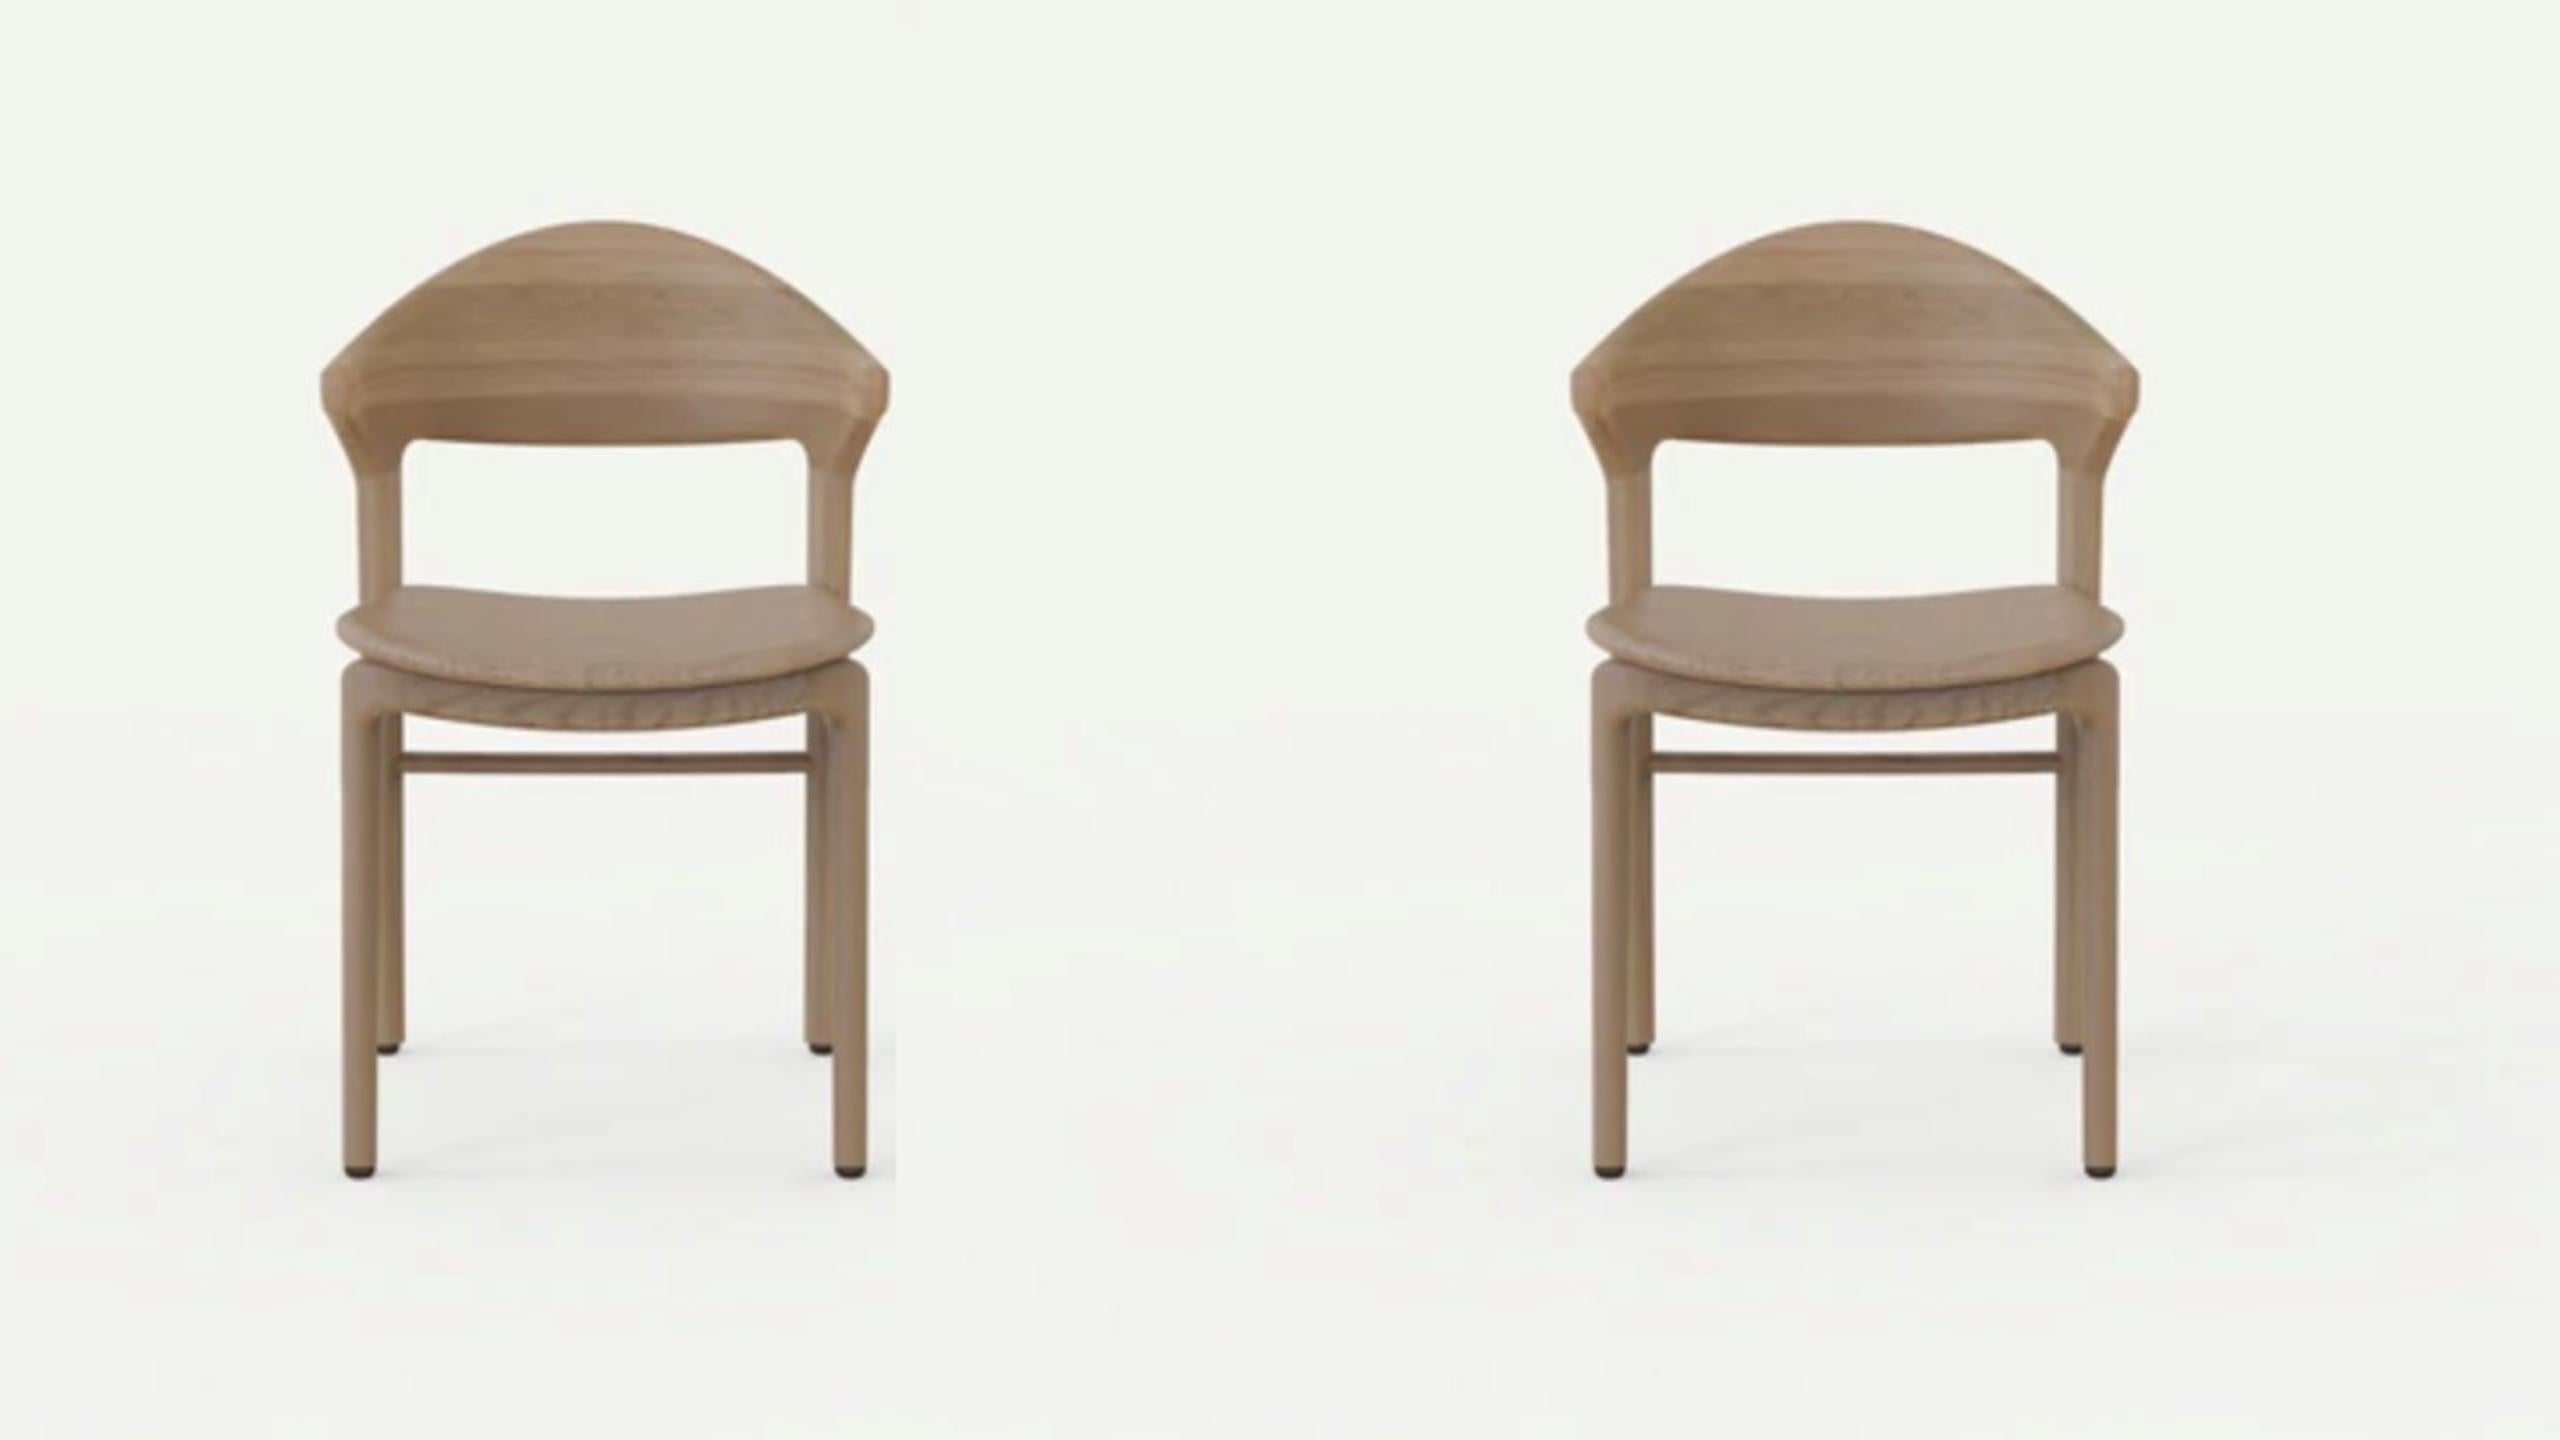 Set Of 2 Boreal chairs by Sebastián Angeles
Material: Walnut
Dimensions: W 46 x D 80 x 50 cm
Also Available: Other colors available, please contact us.

The observation of natural forms generates a path that is found within our design. Some